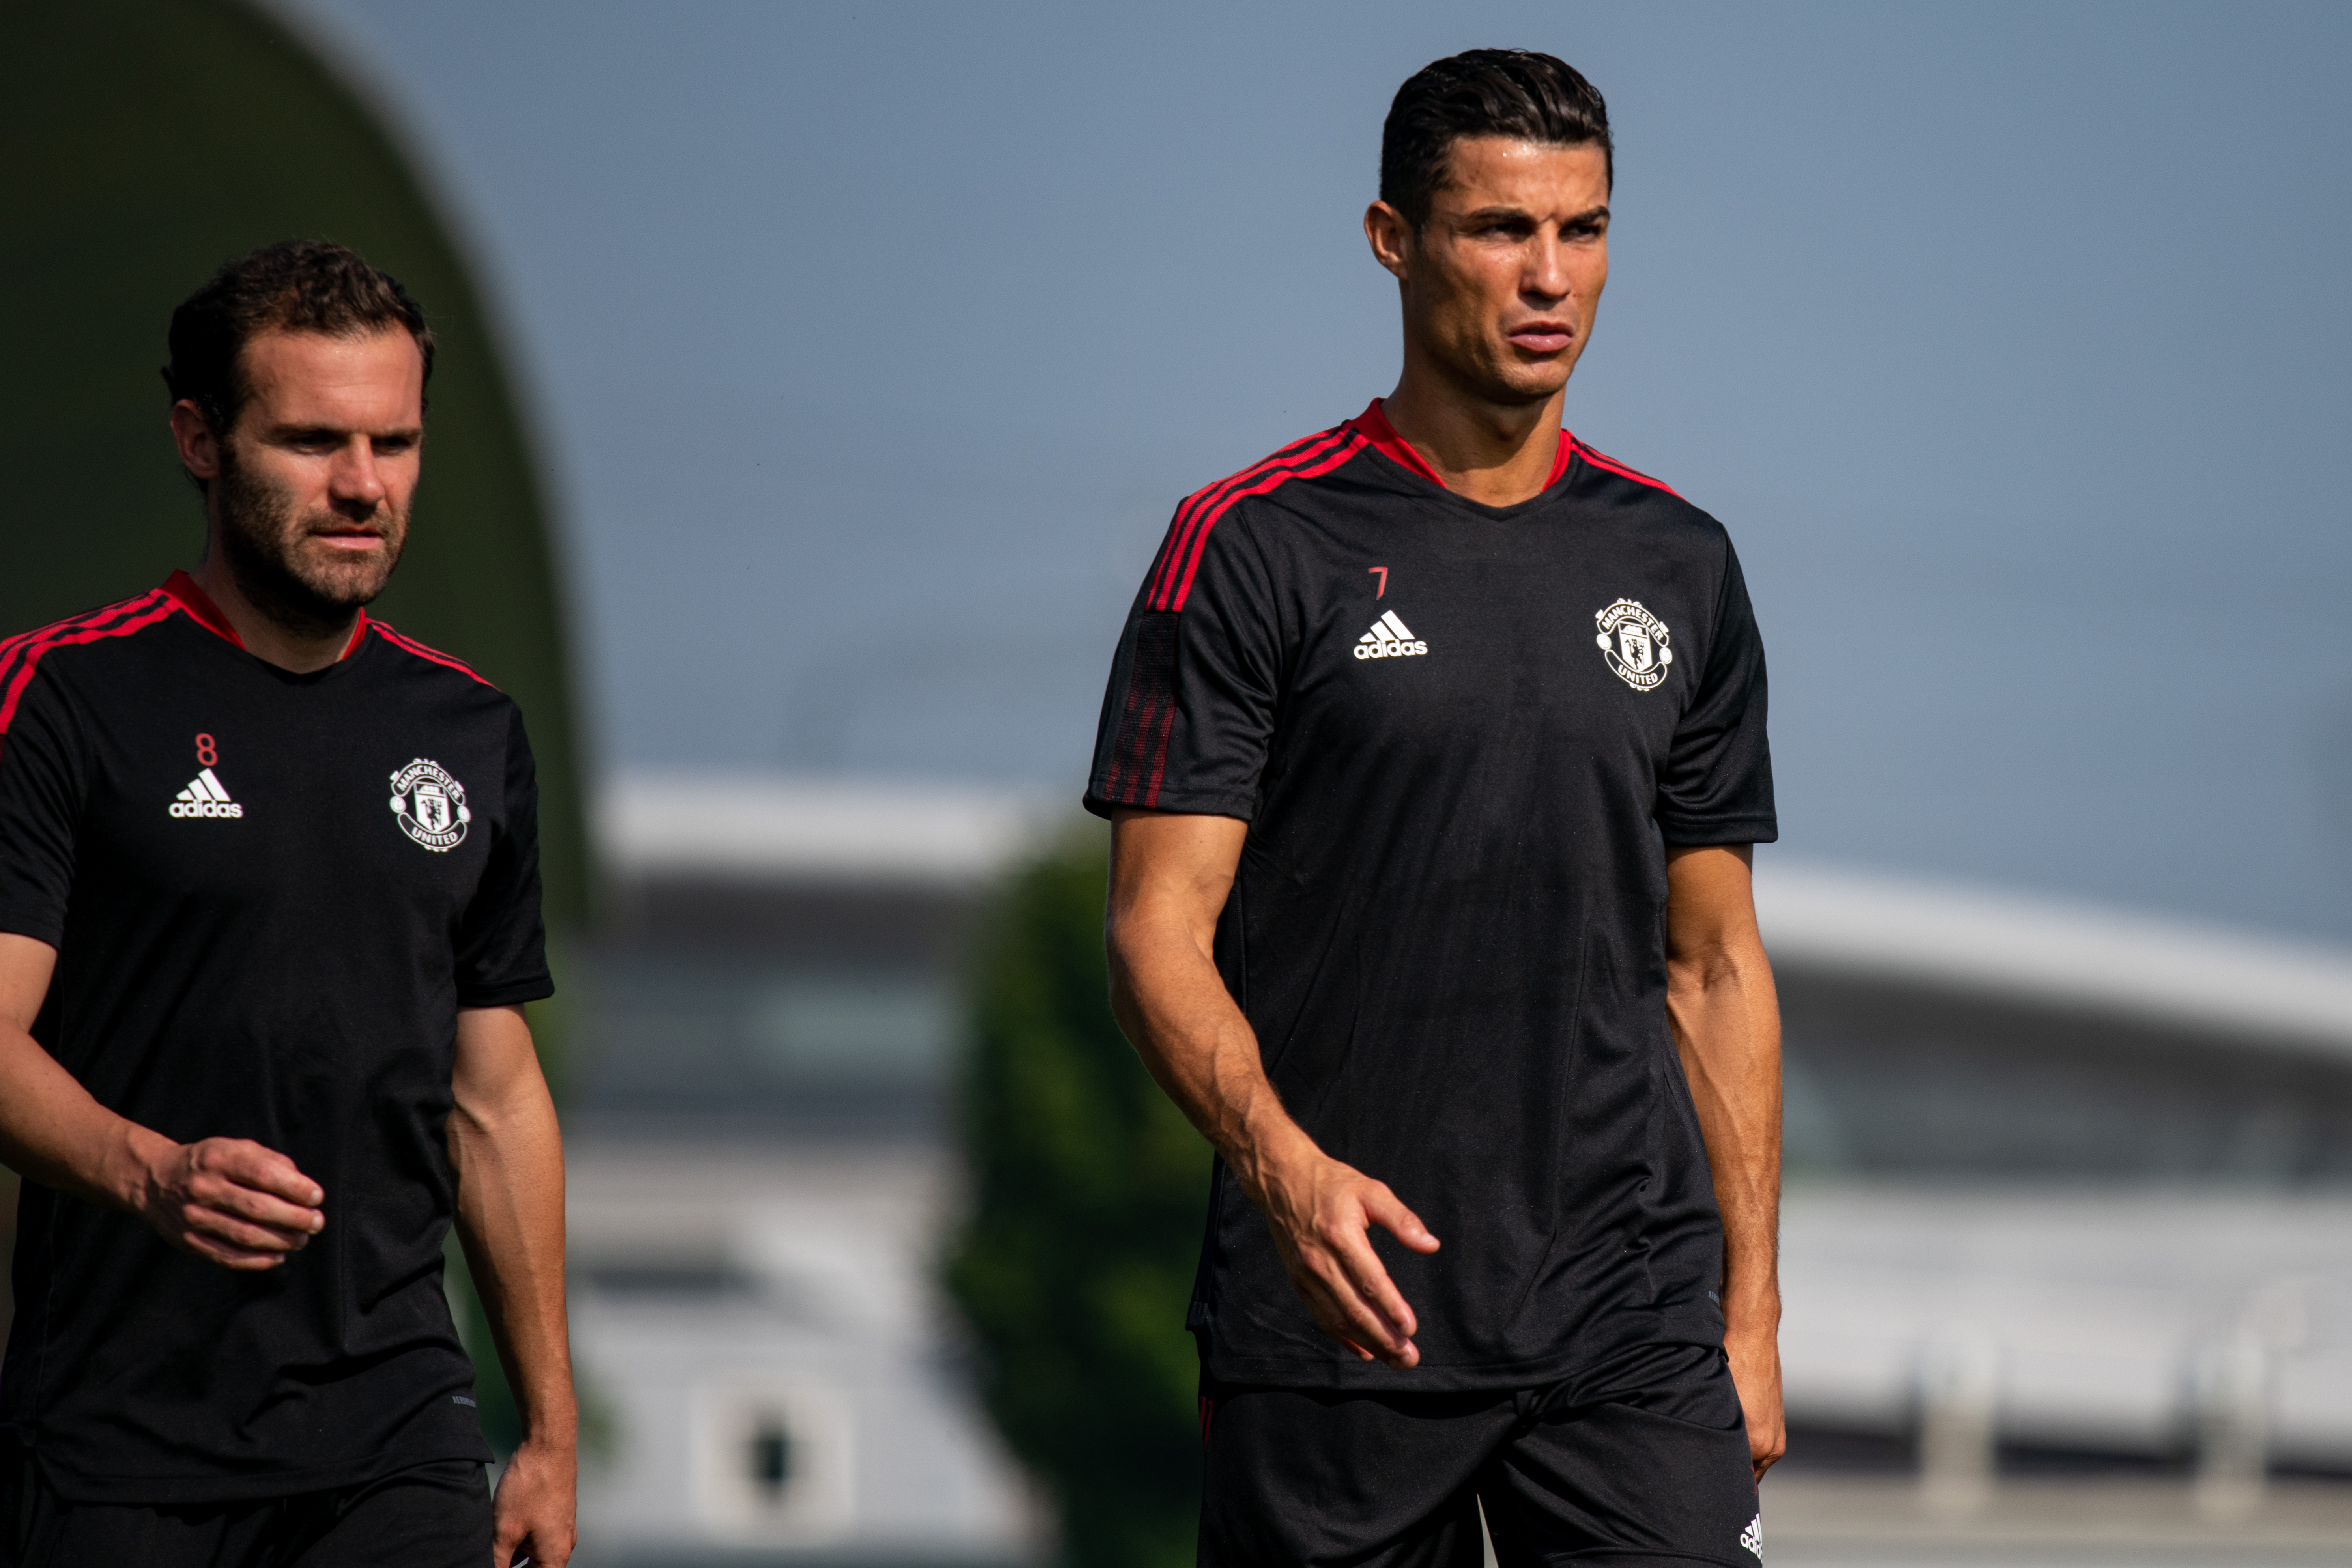 Ronaldo has been training all week ahead of his return to action